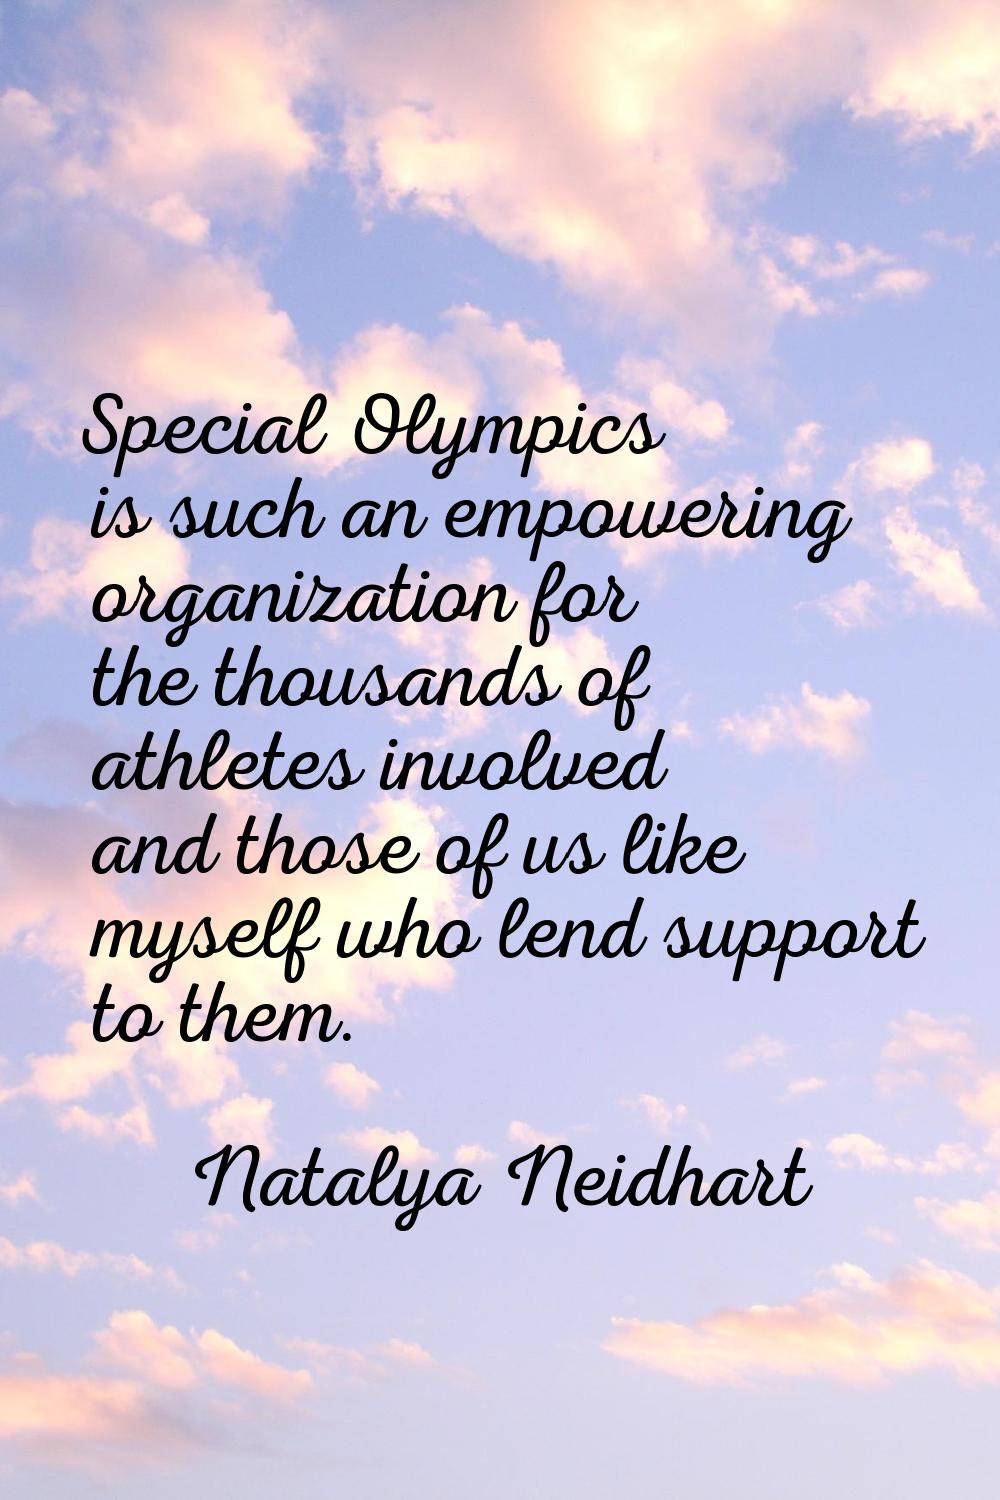 Special Olympics is such an empowering organization for the thousands of athletes involved and thos